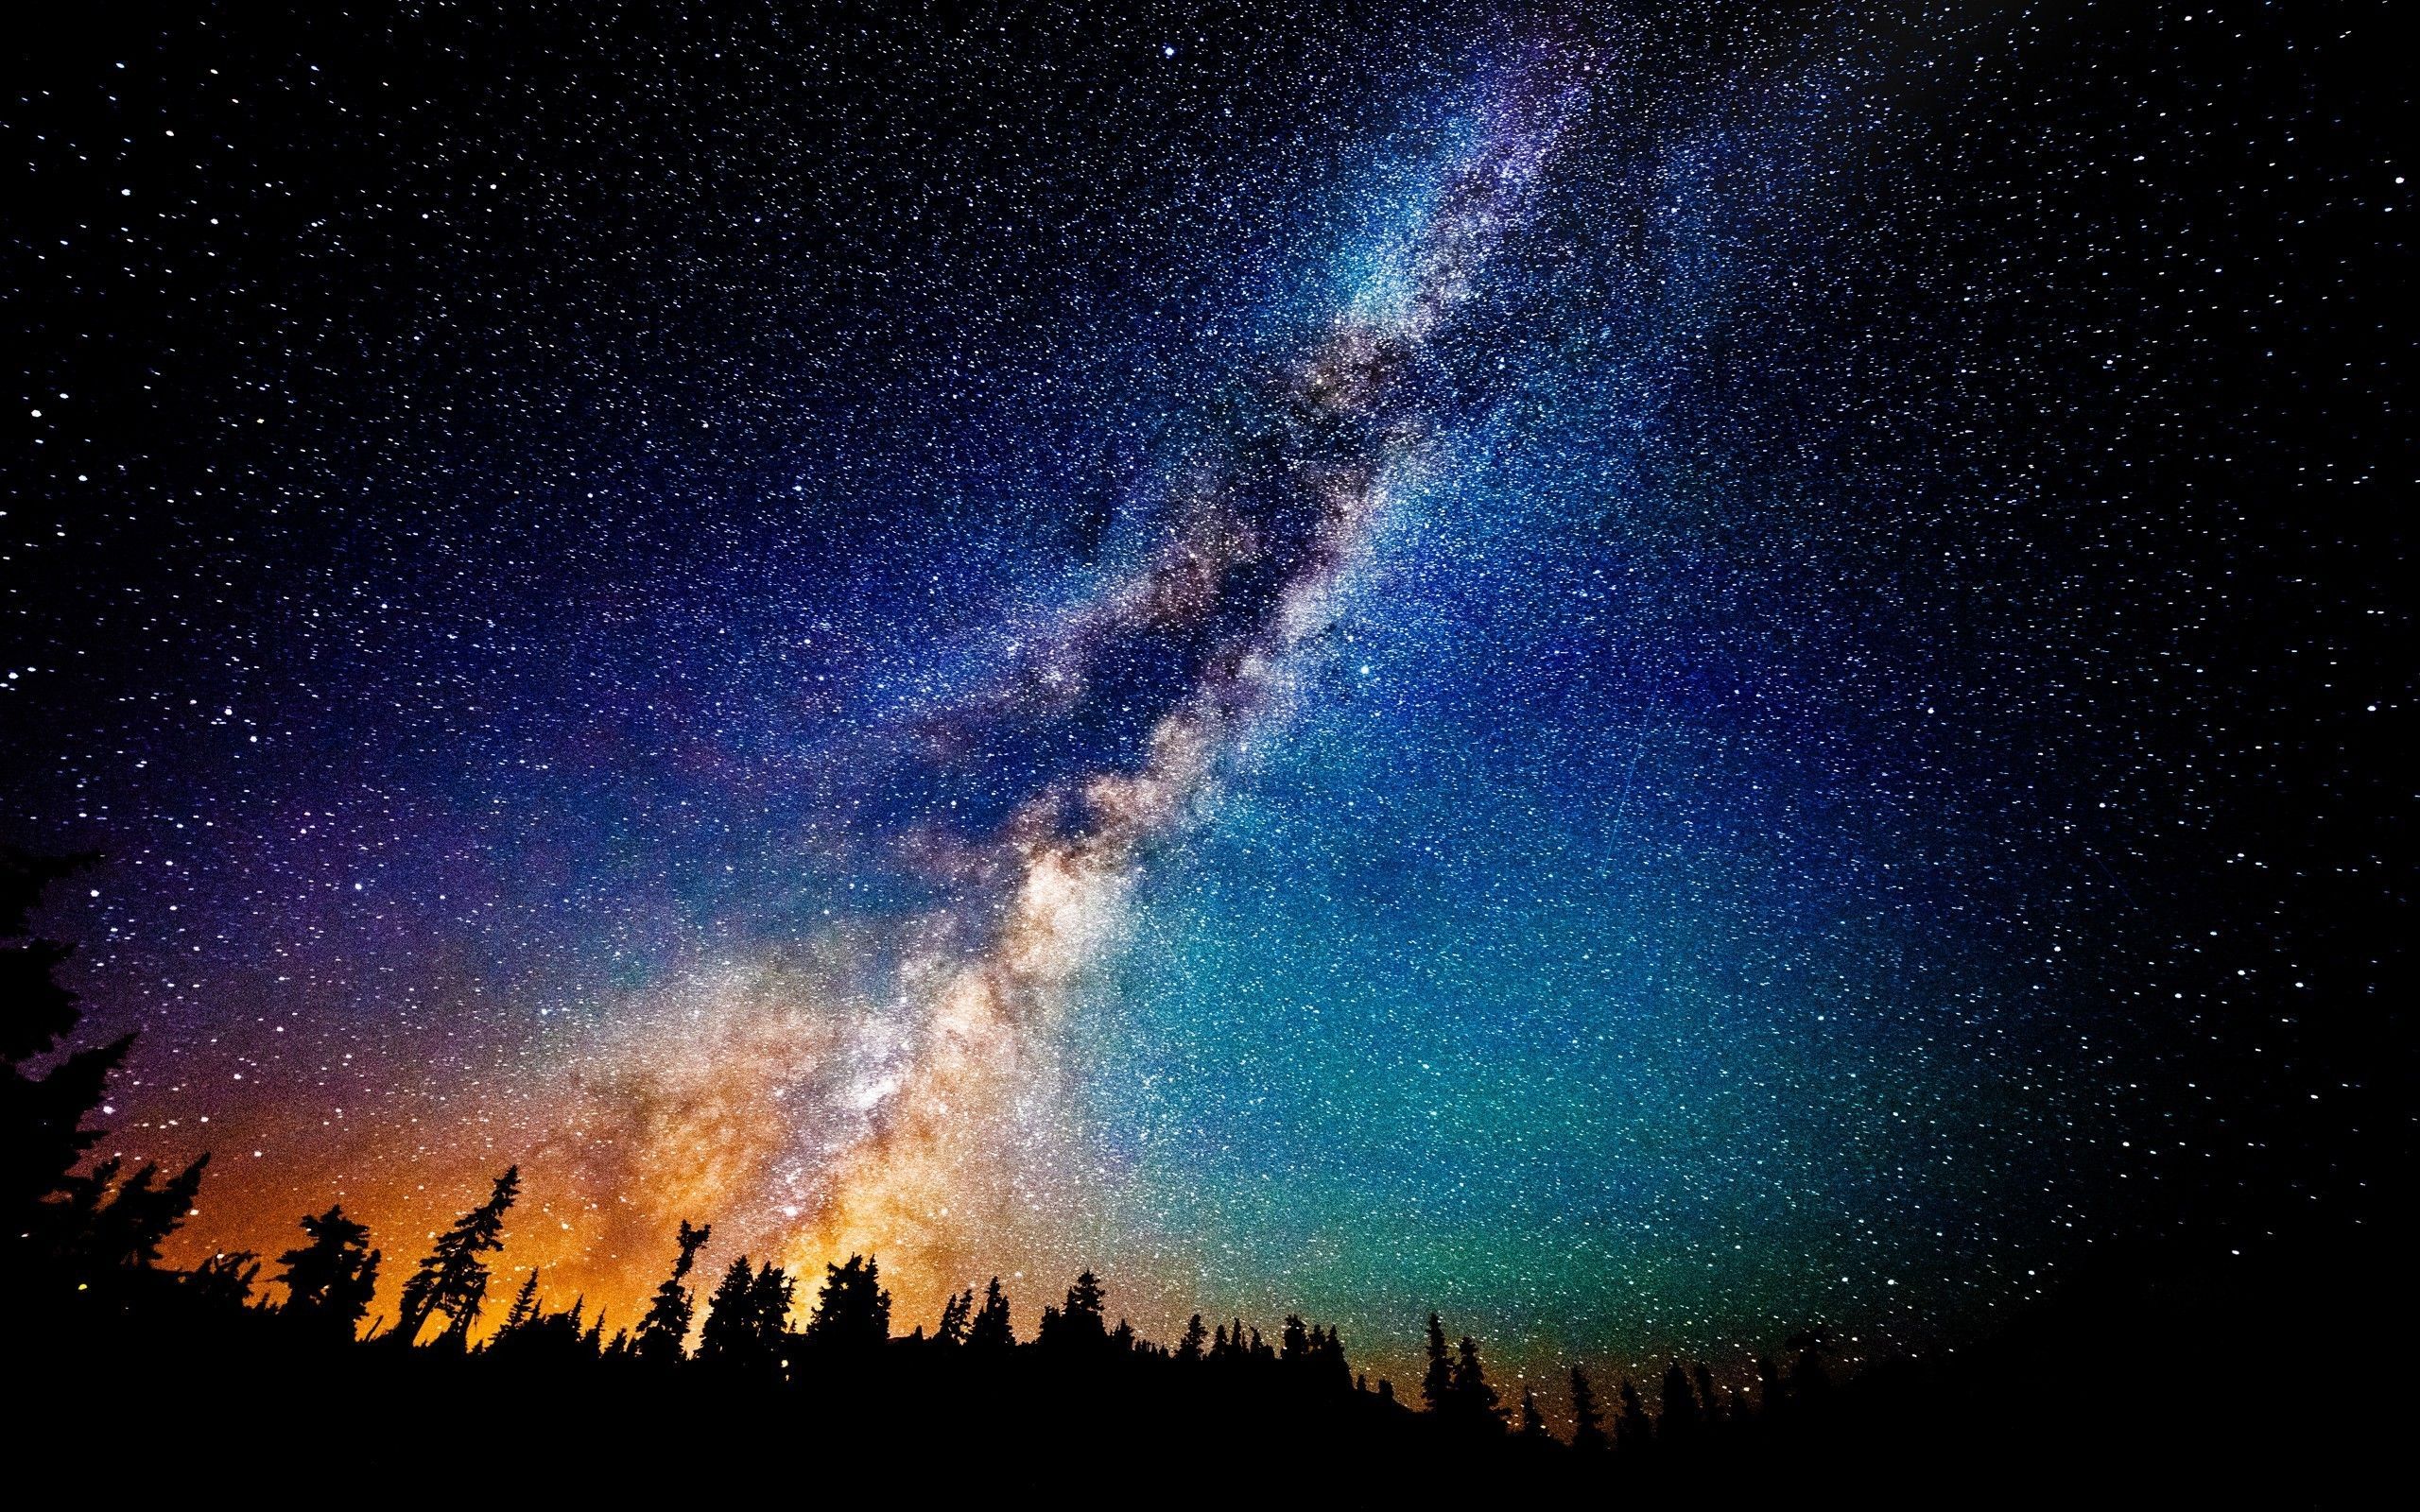 Milky Way Galaxy Wallpaper Mac - Pics about space